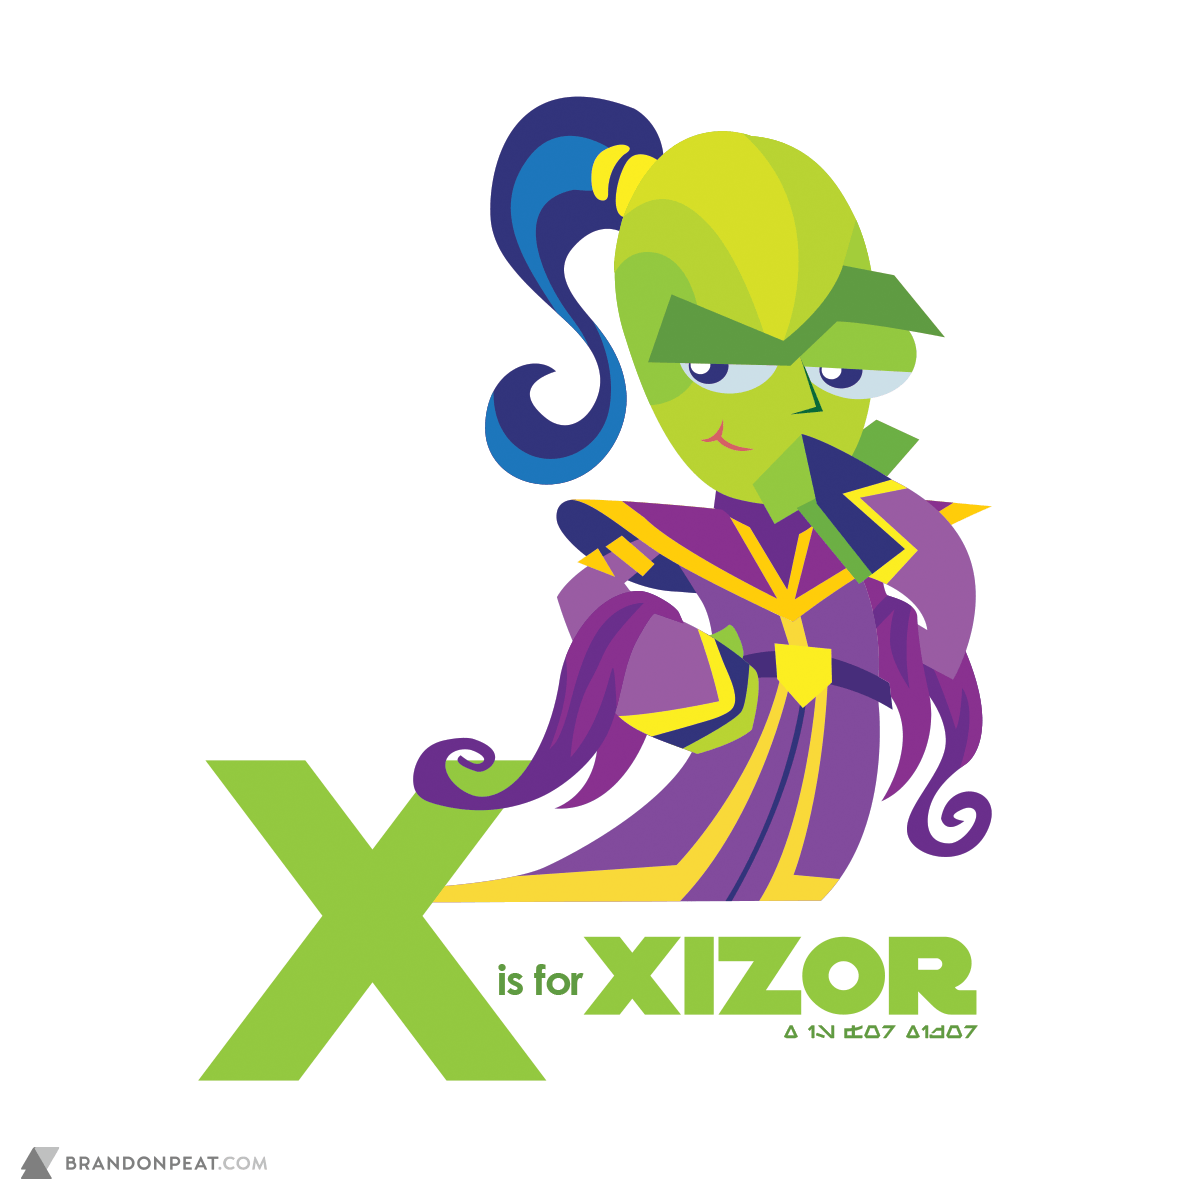 A Is For Ackbar: X Is For Xizor